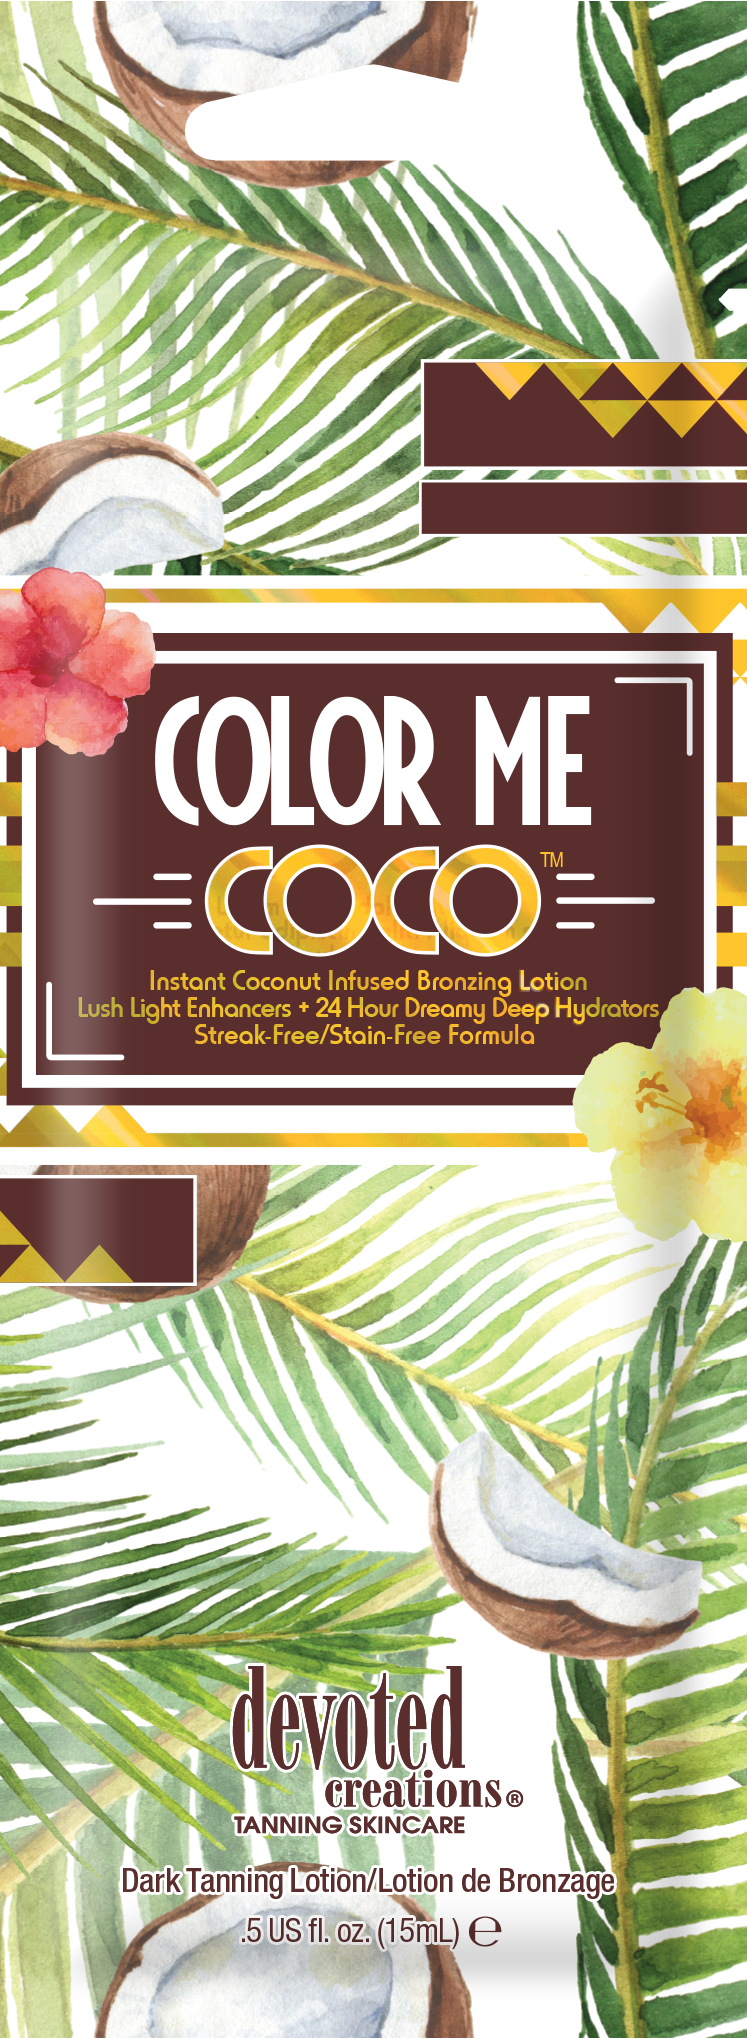 Devoted Creations | Color Me Coco